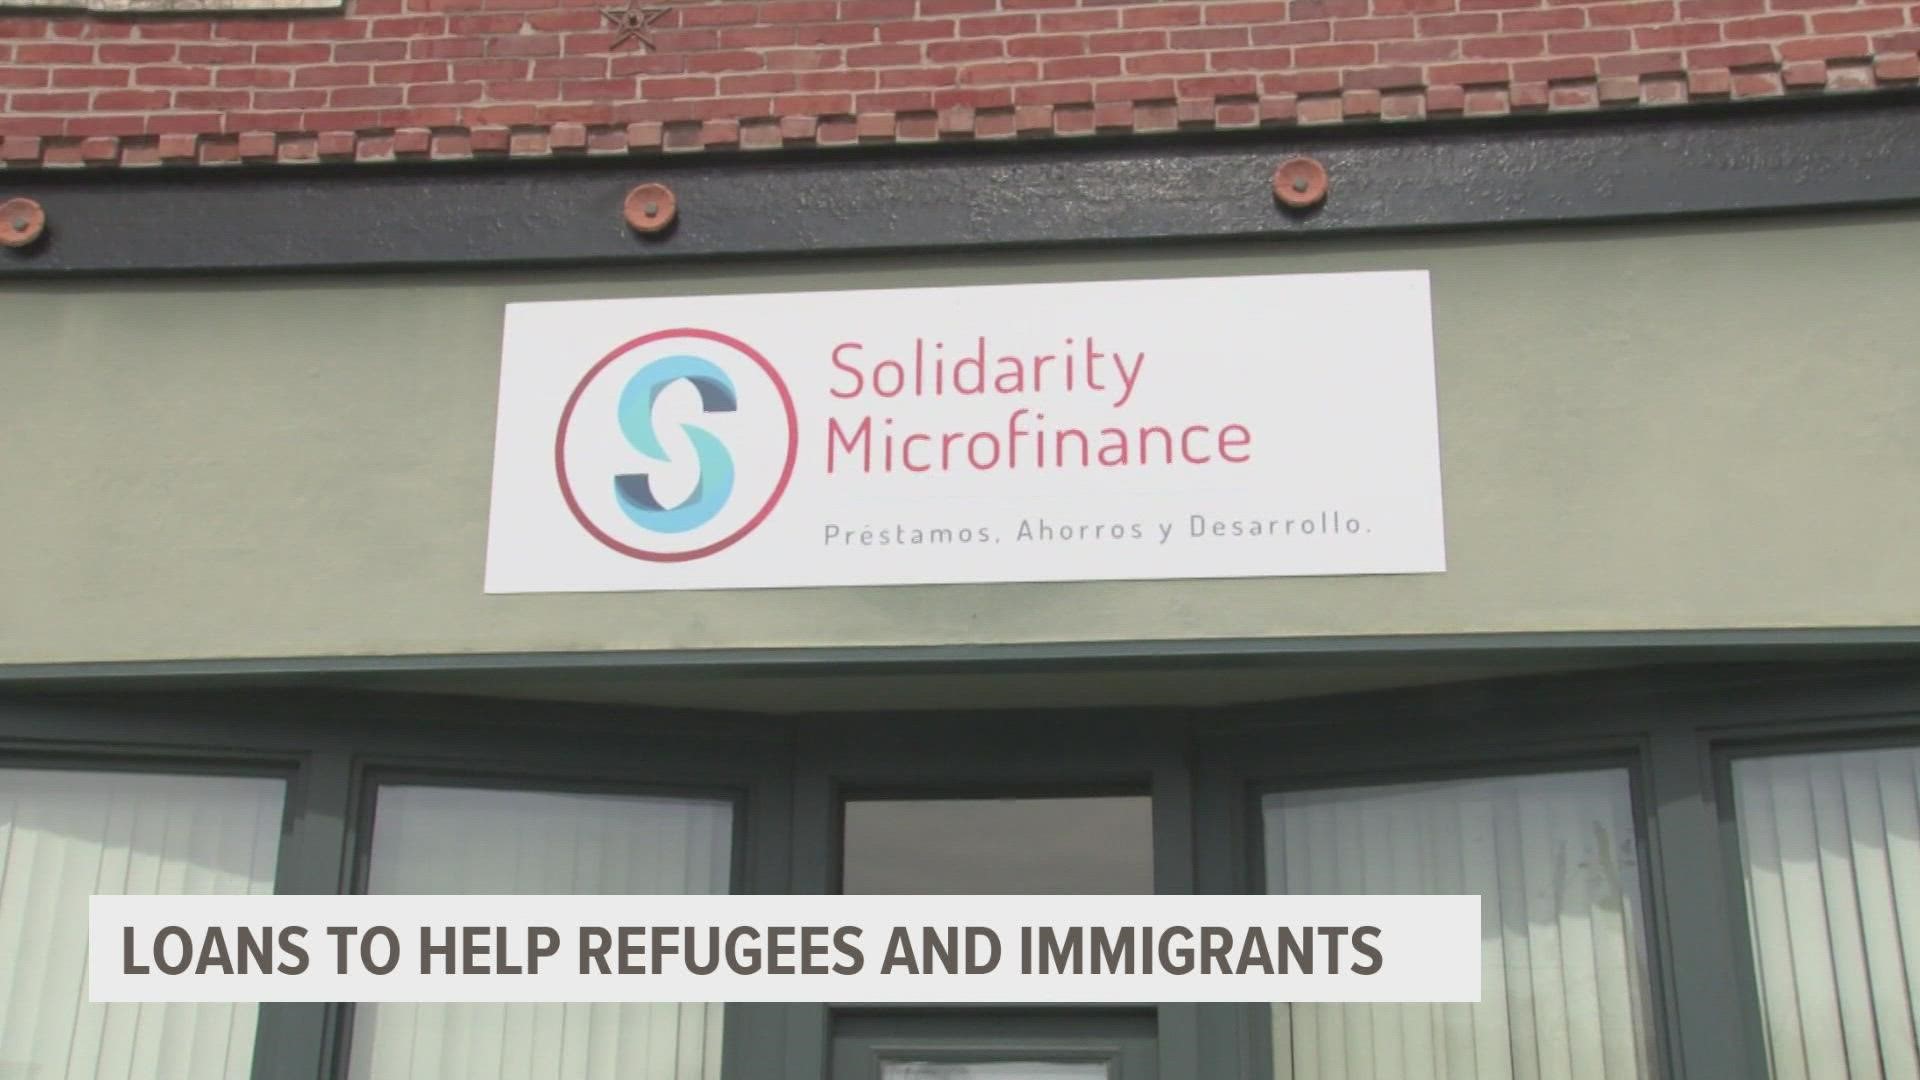 A non-profit received a $300,000 dollar grant from Bank of America to continue helping immigrants and refugees get loans to start businesses.